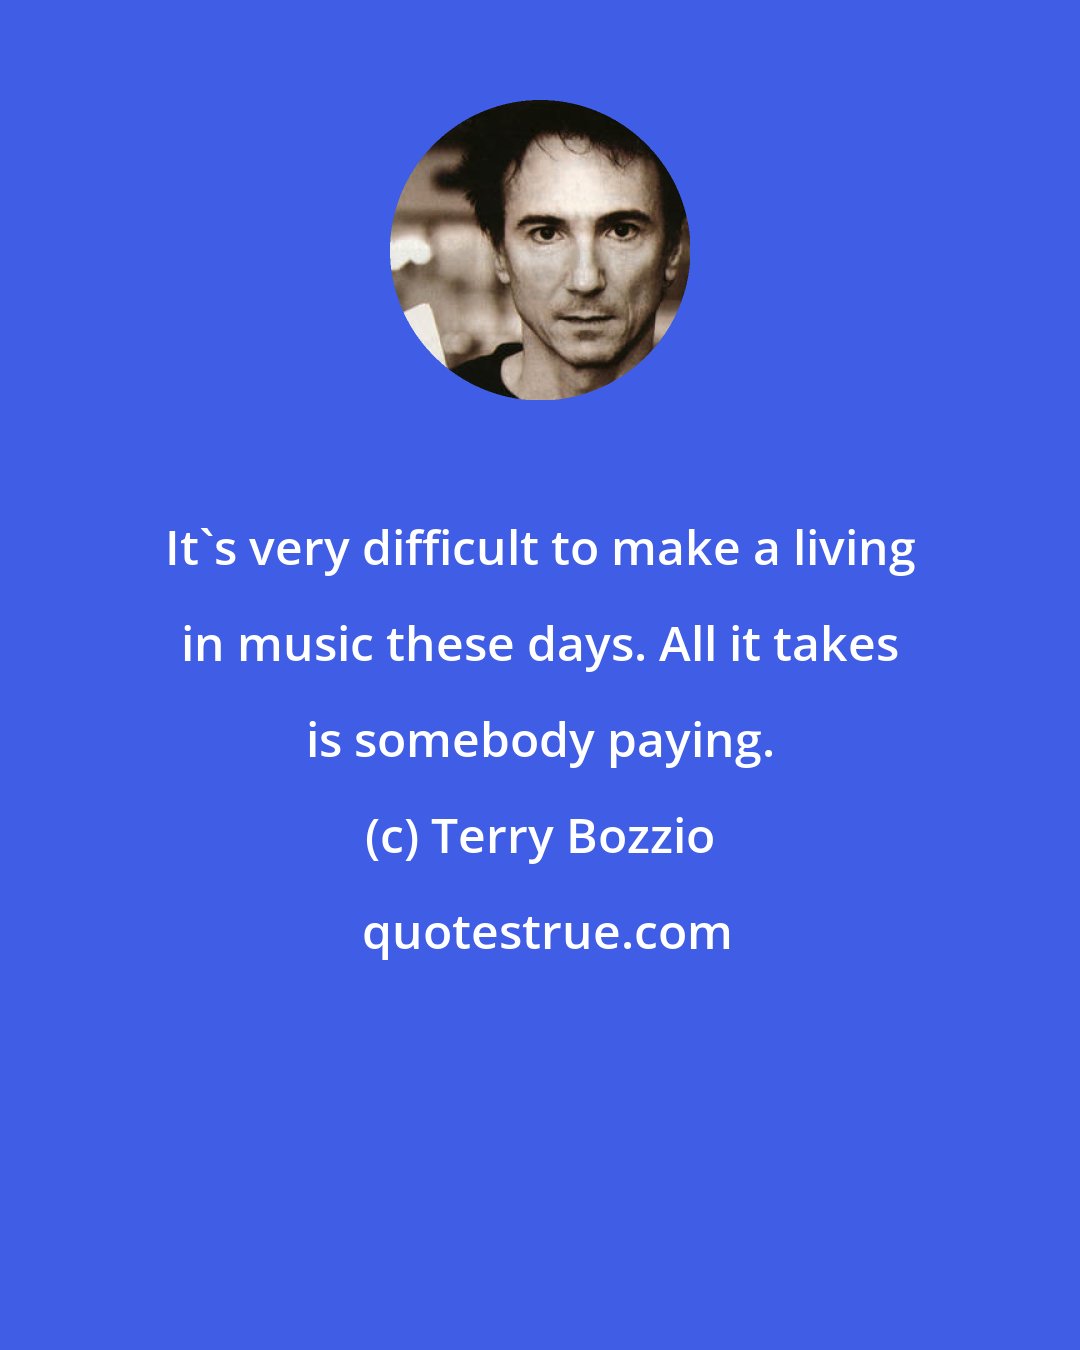 Terry Bozzio: It's very difficult to make a living in music these days. All it takes is somebody paying.